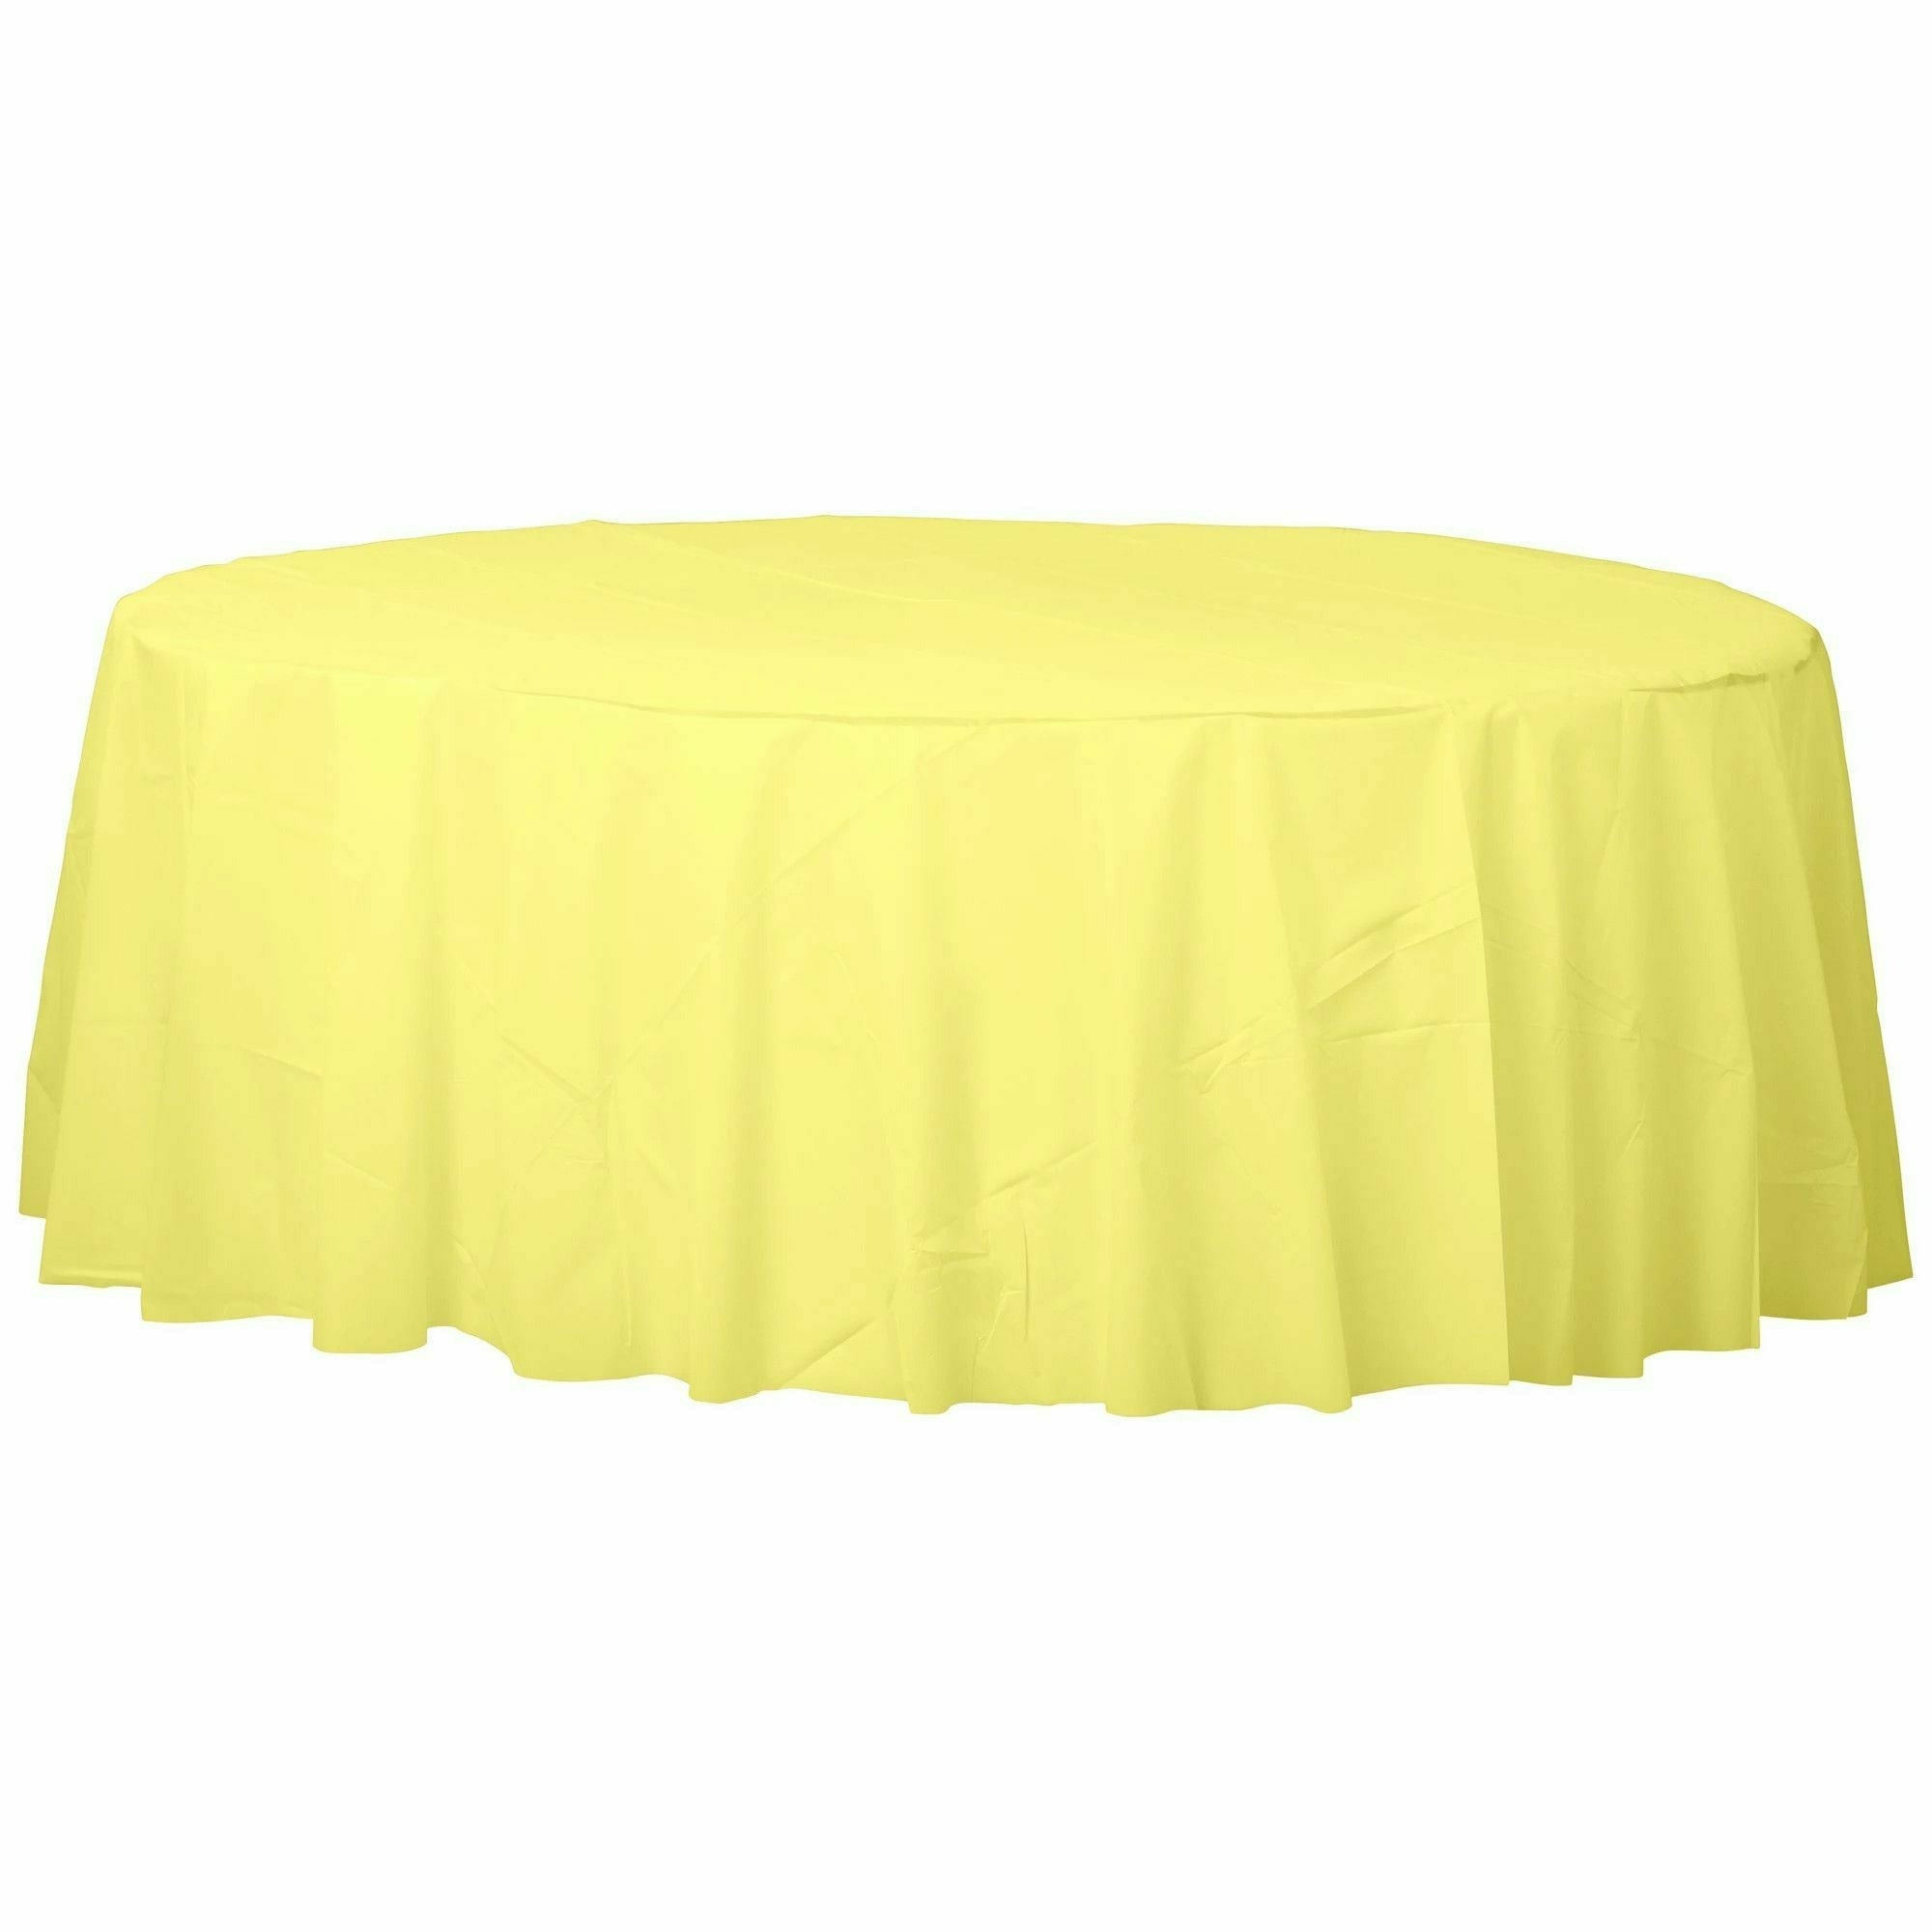 Amscan BASIC Light Yellow - 84" Round Plastic Table Cover